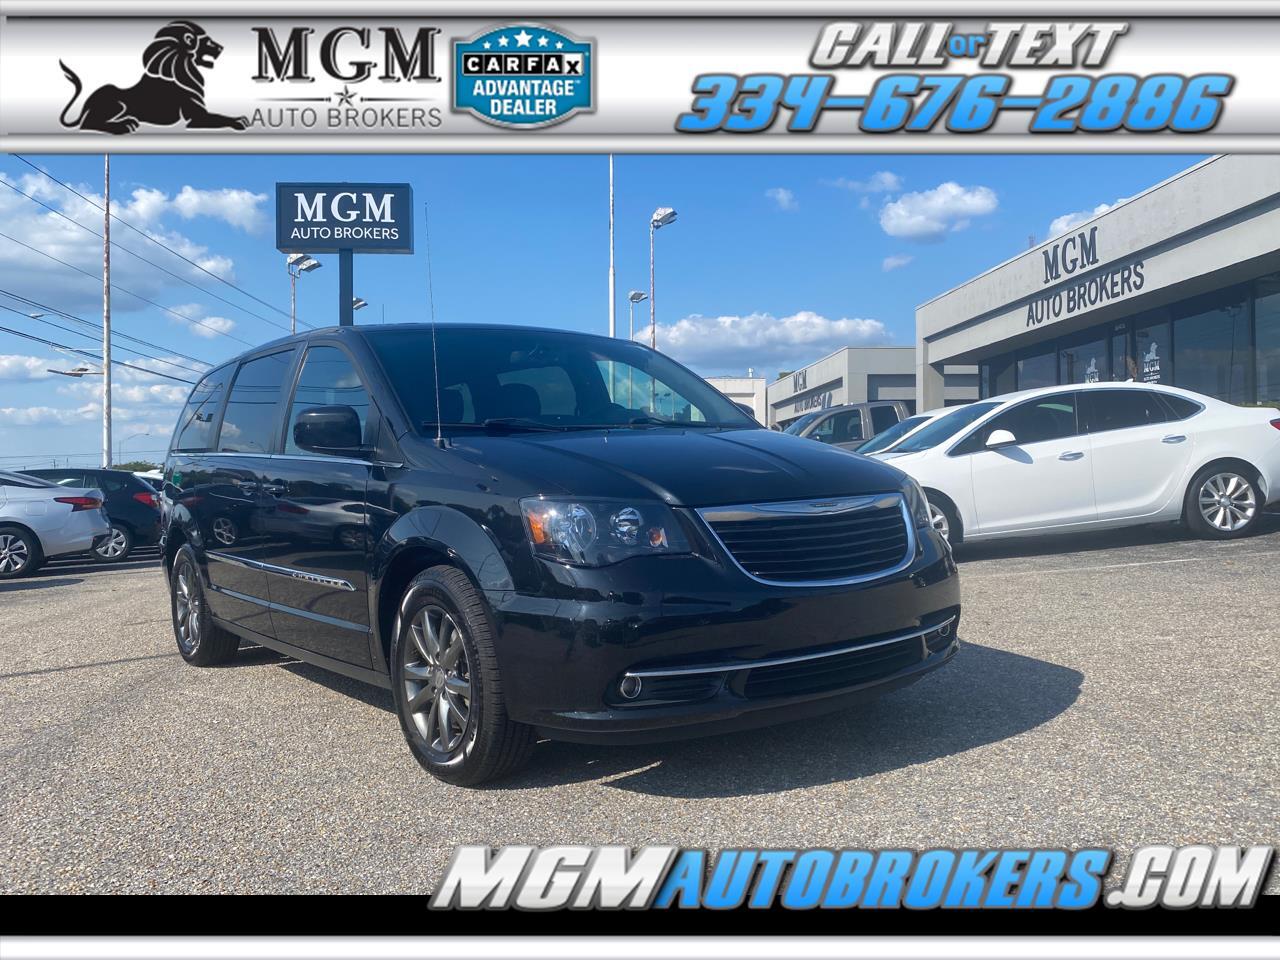 Chrysler Town & Country  2015